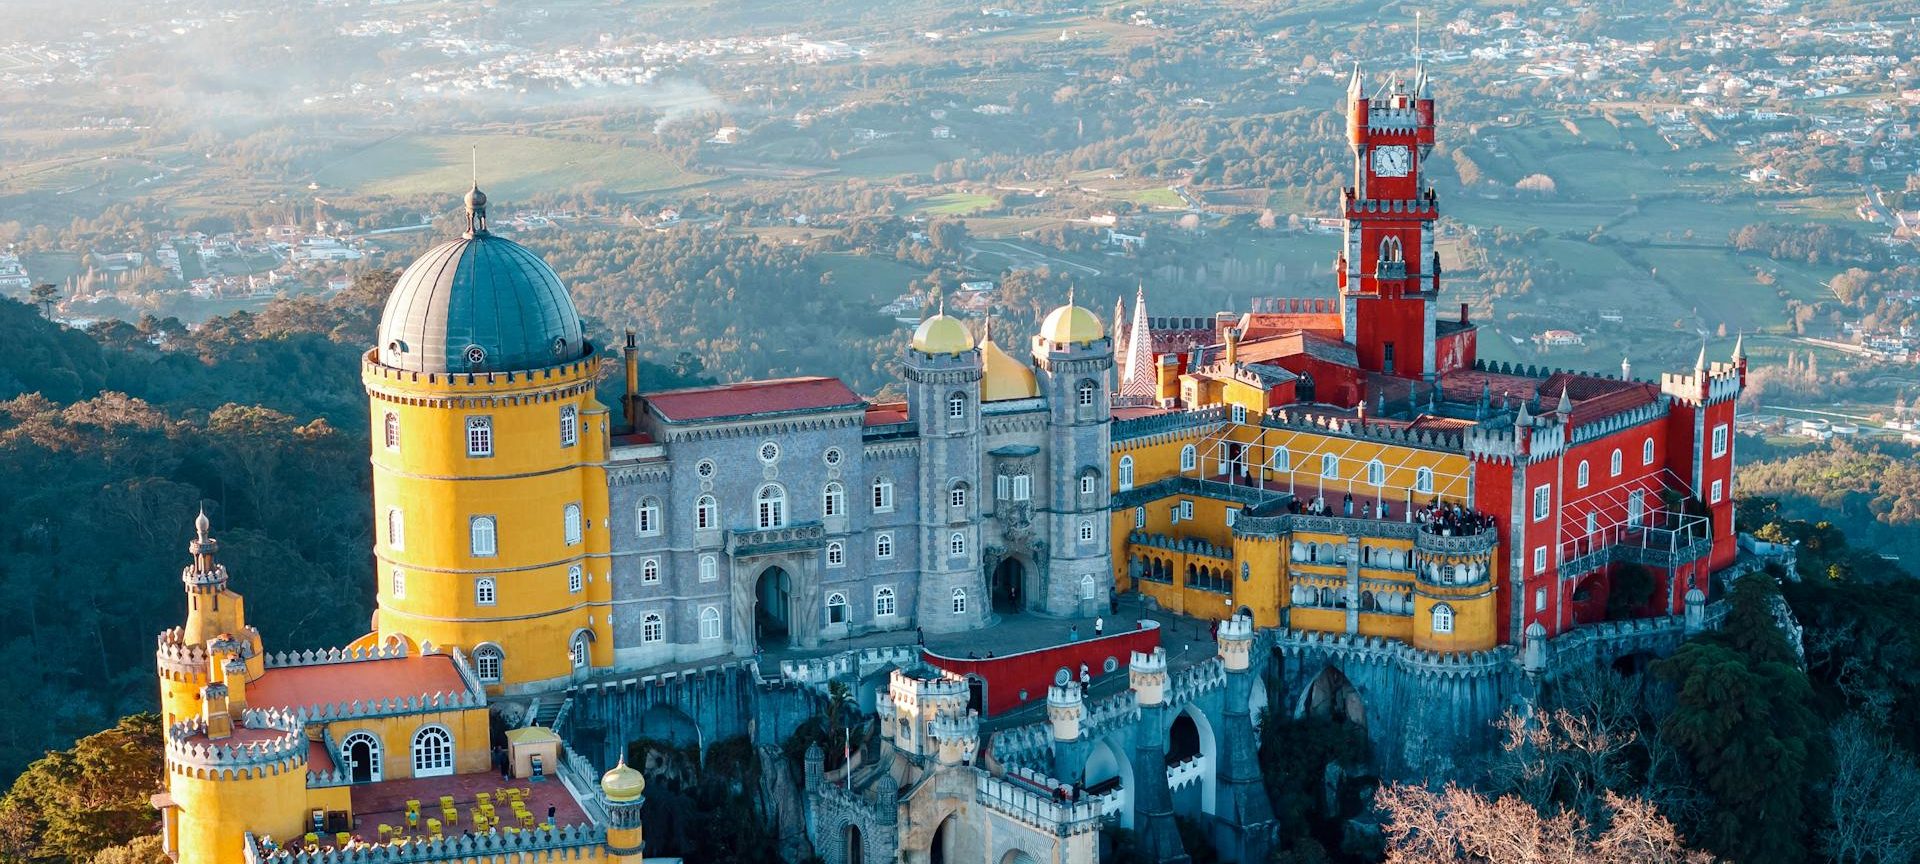 Can I Get Married in Portugal as a Foreigner - Palace of Pena